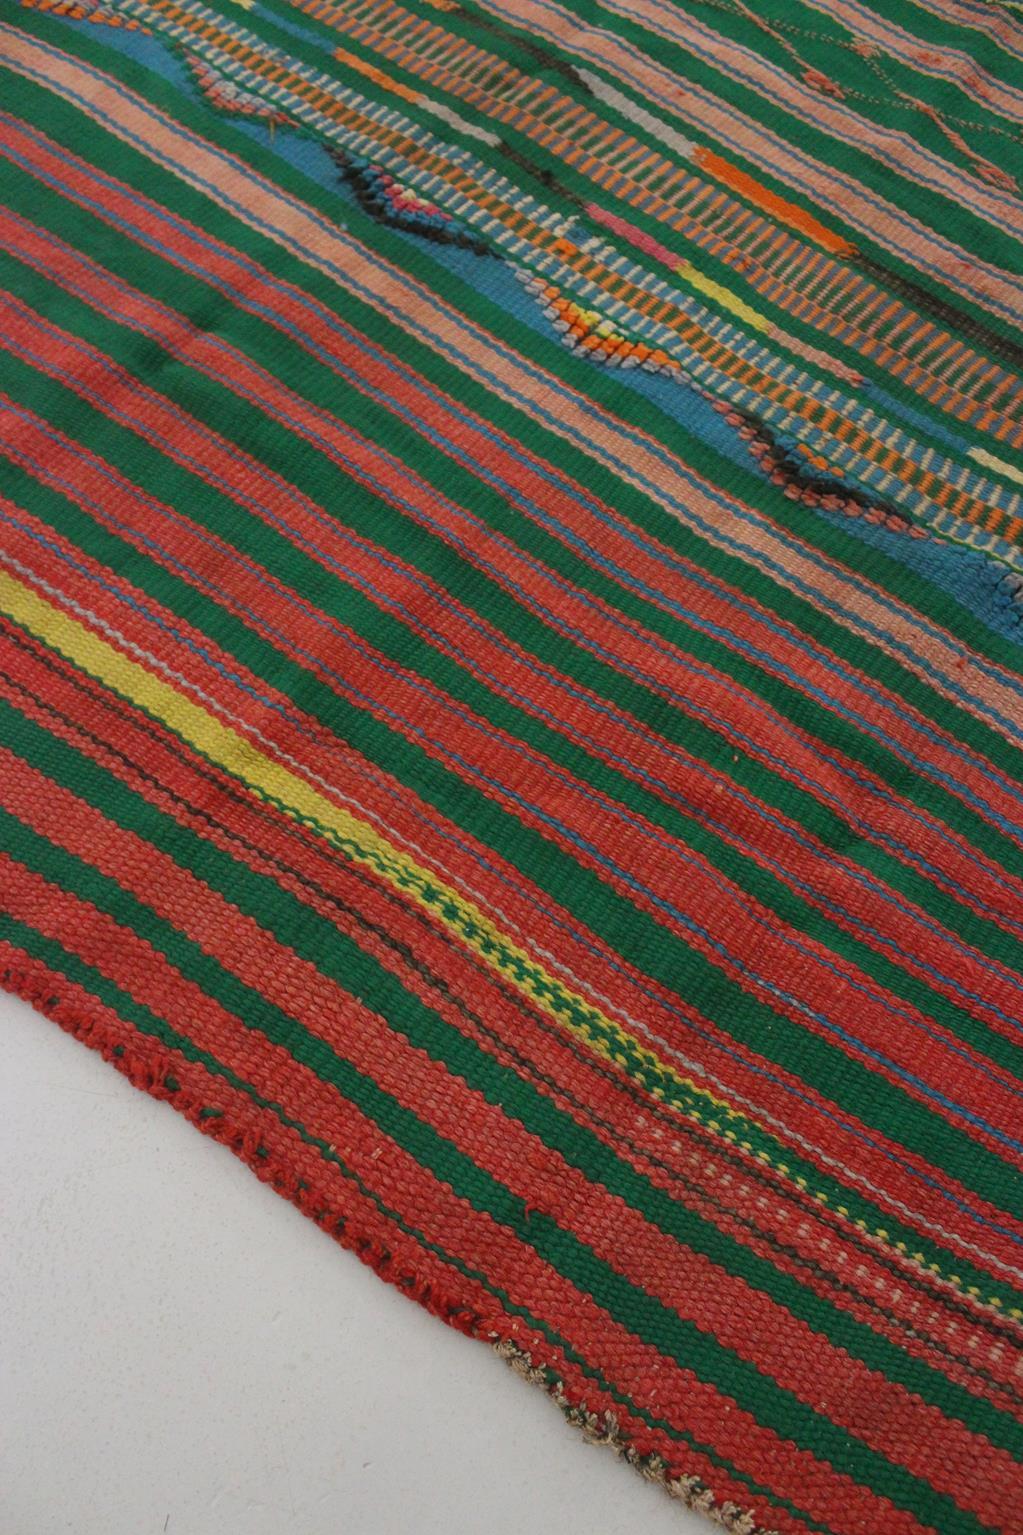 Vintage Moroccan striped kilim rug - Green/pink/red - 5.1x10.2feet / 157x312cm In Fair Condition For Sale In Marrakech, MA